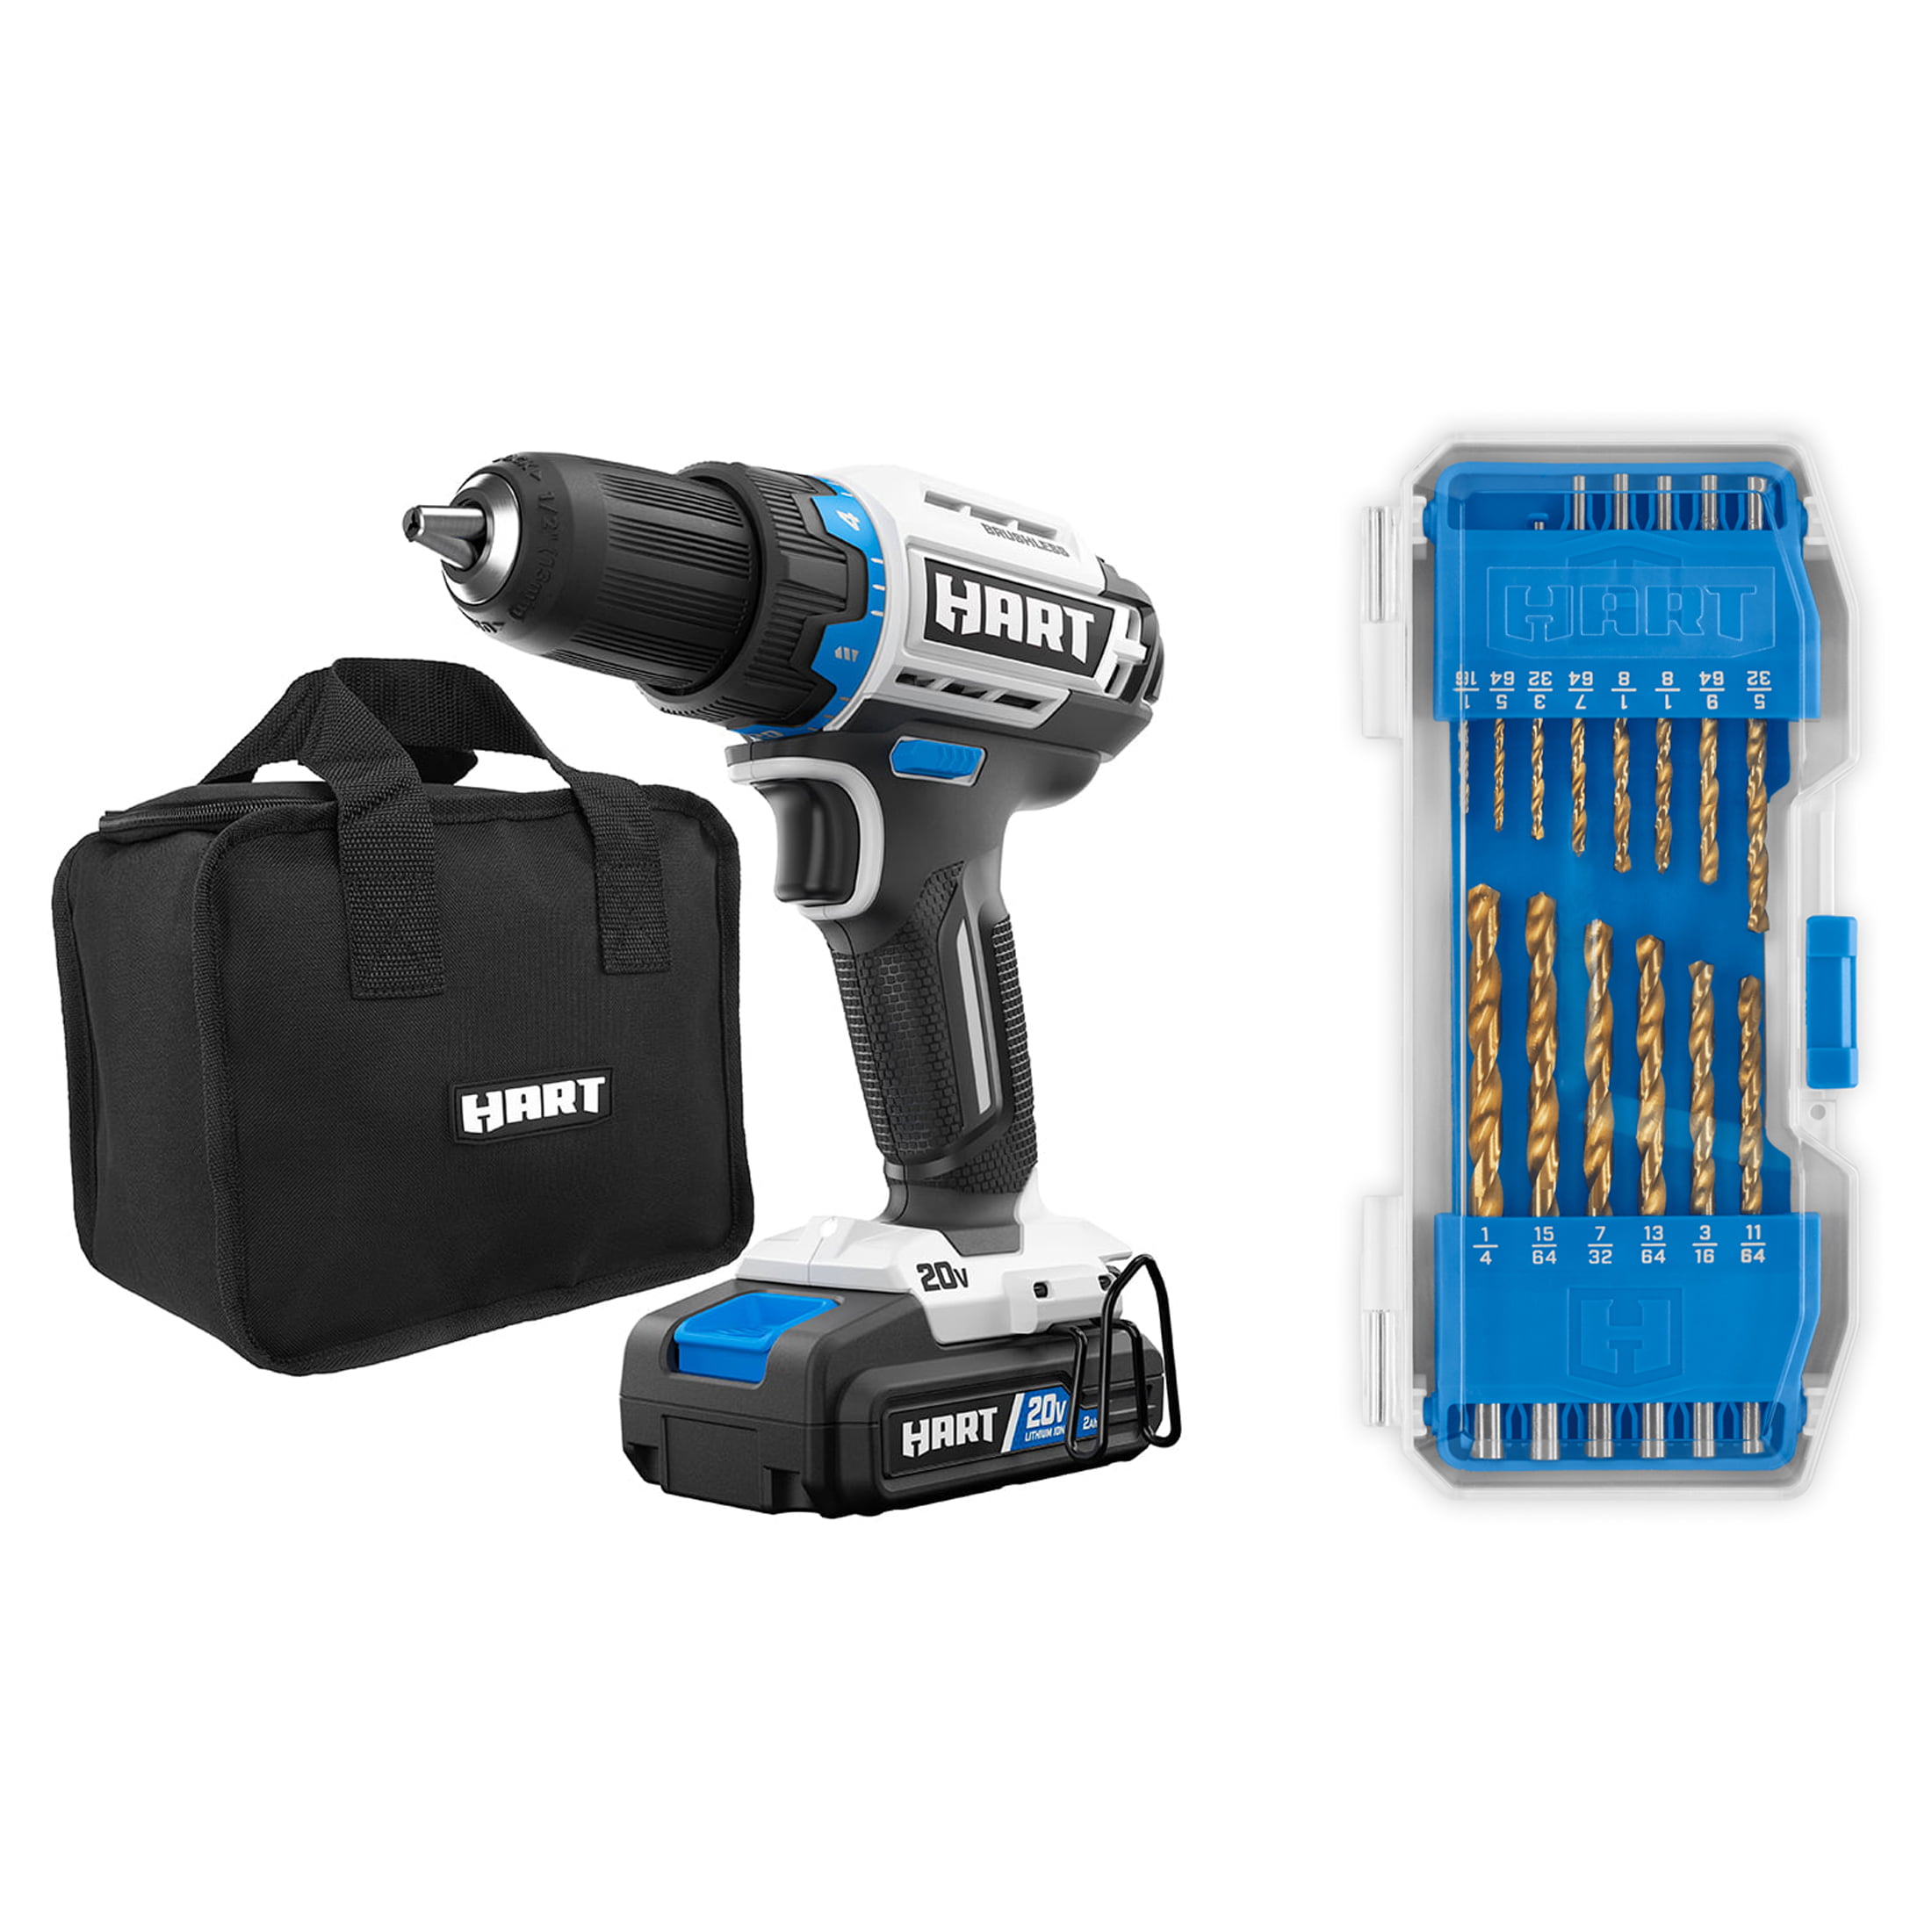 HR 20-Volt Brushless ½-inch Drill/Driver and 14P Drill Bit Set Bundle